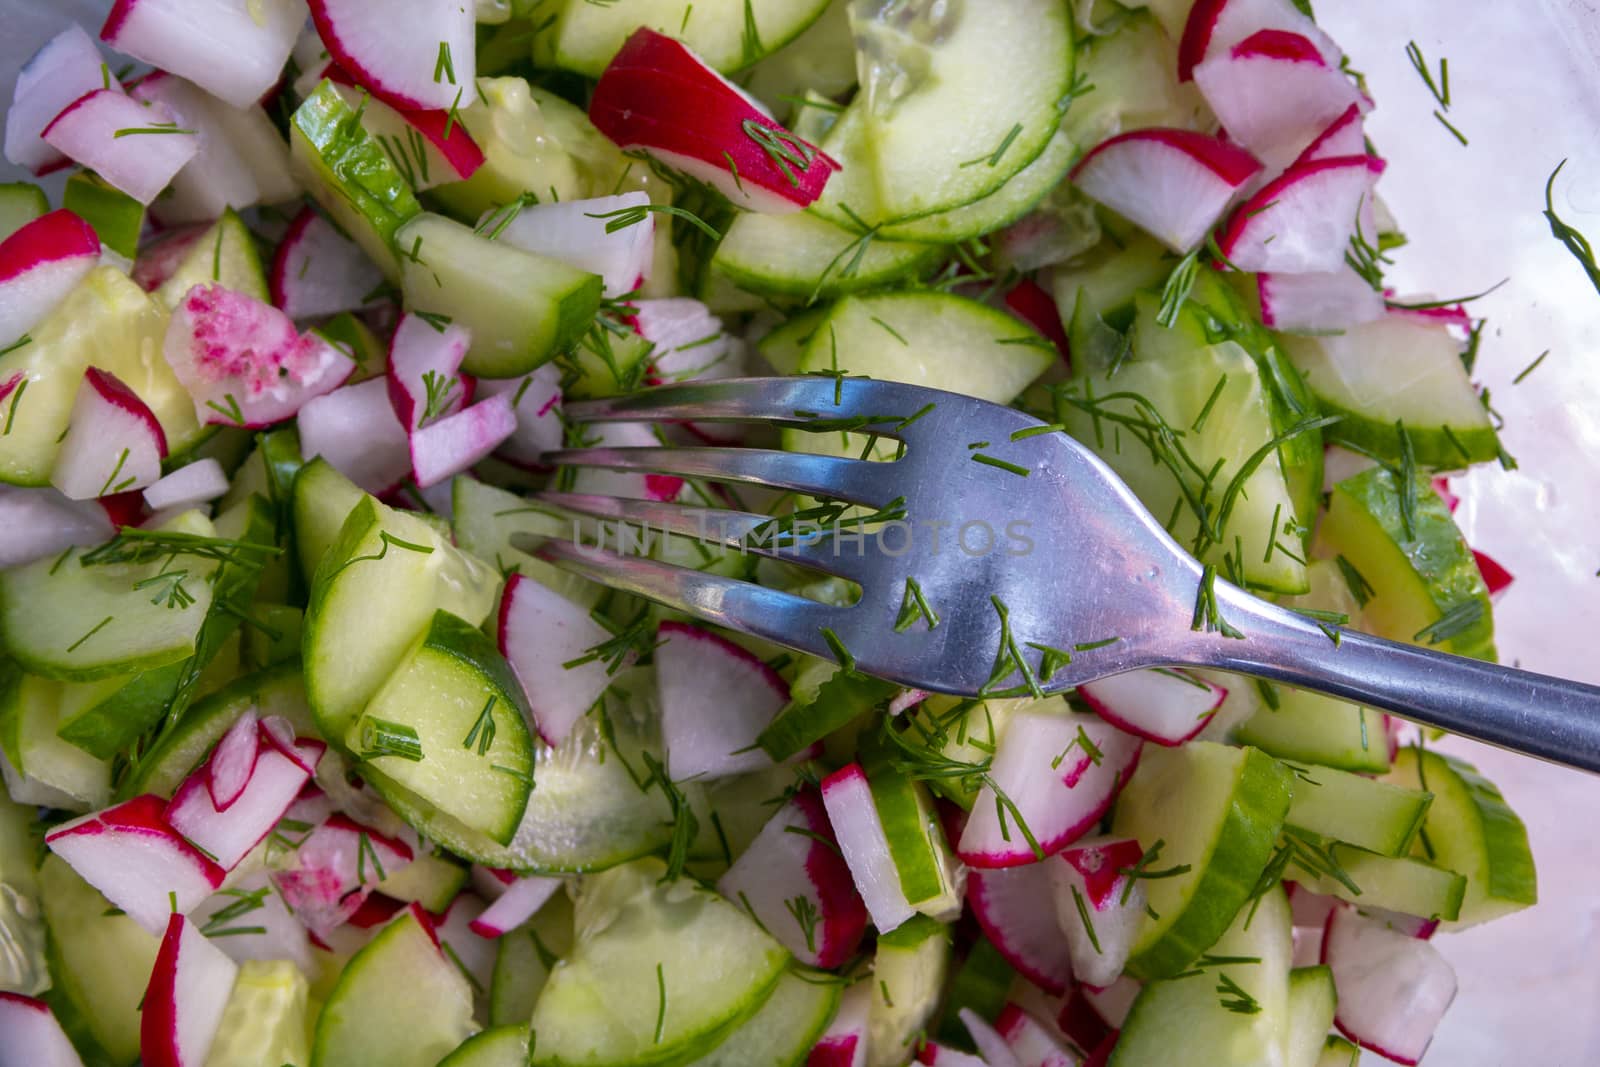 healthy eating. Vegetables. Juicy radish and cucumber salad with dill